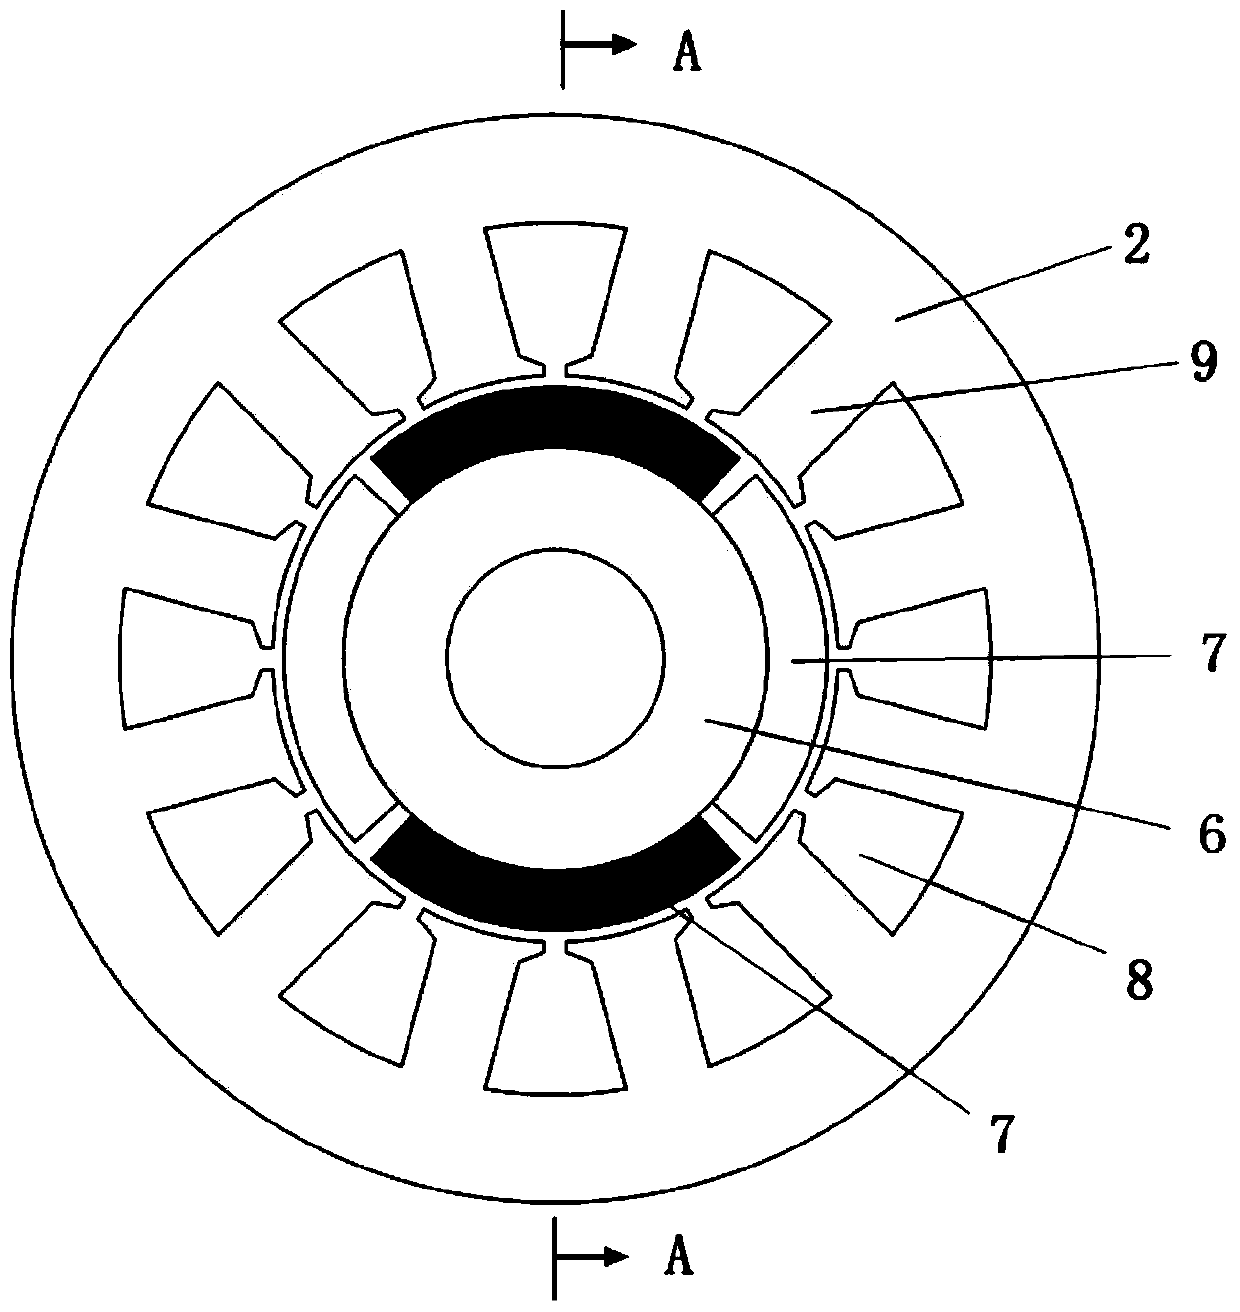 A Permanent Magnet Motor with Reduced Pole Frequency and Slot Frequency Radial Electromagnetic Exciting Force